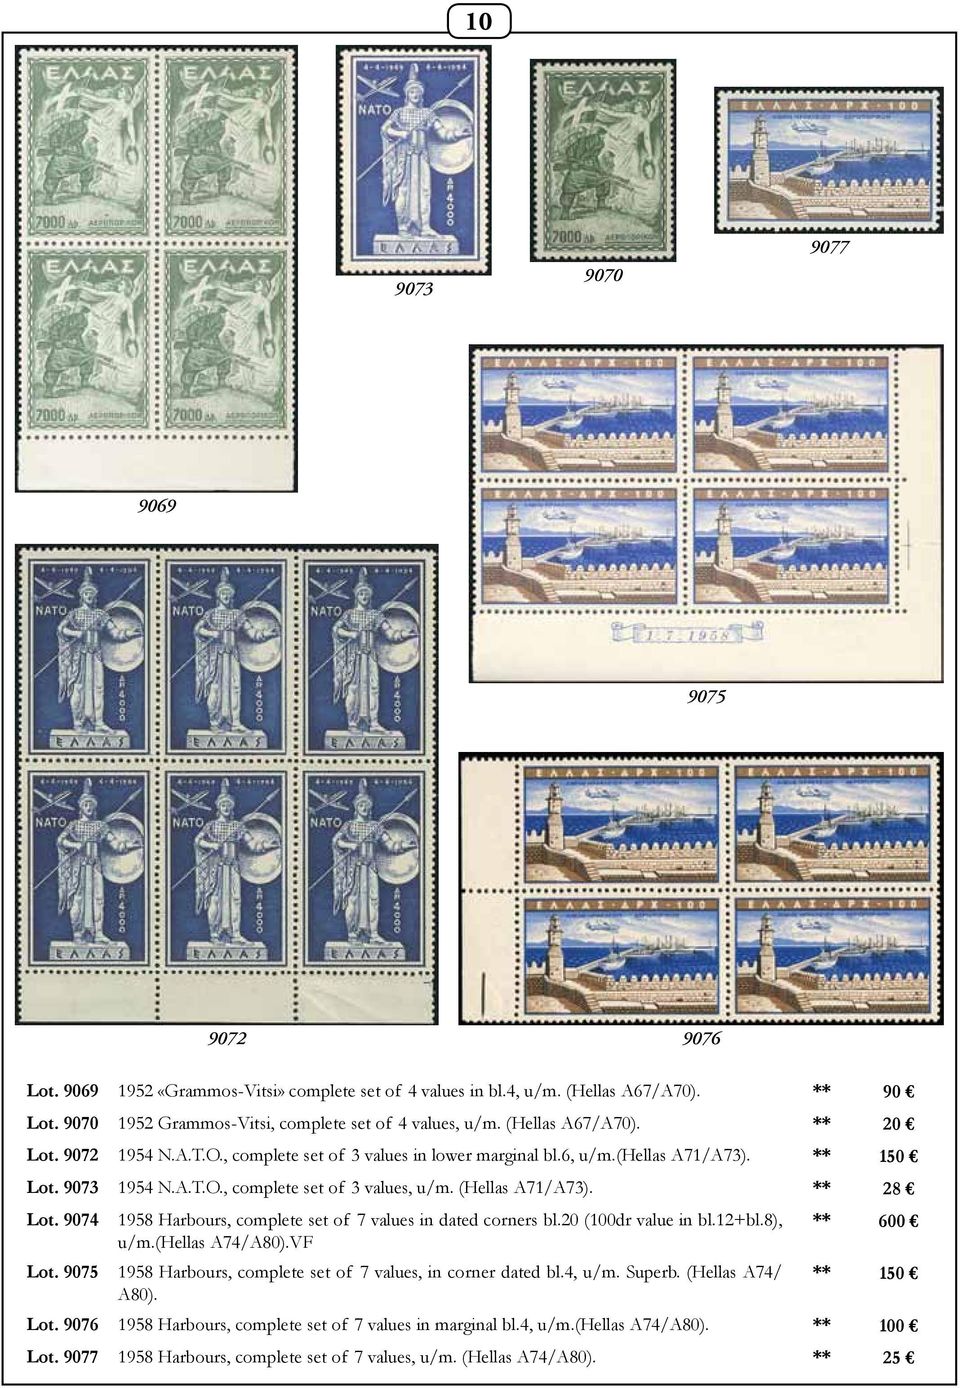 ** 28 Lot. 9074 1958 Harbours, complete set of 7 values in dated corners bl.20 (100dr value in bl.12+bl.8), ** 600 u/m.(hellas A74/A80).VF Lot.